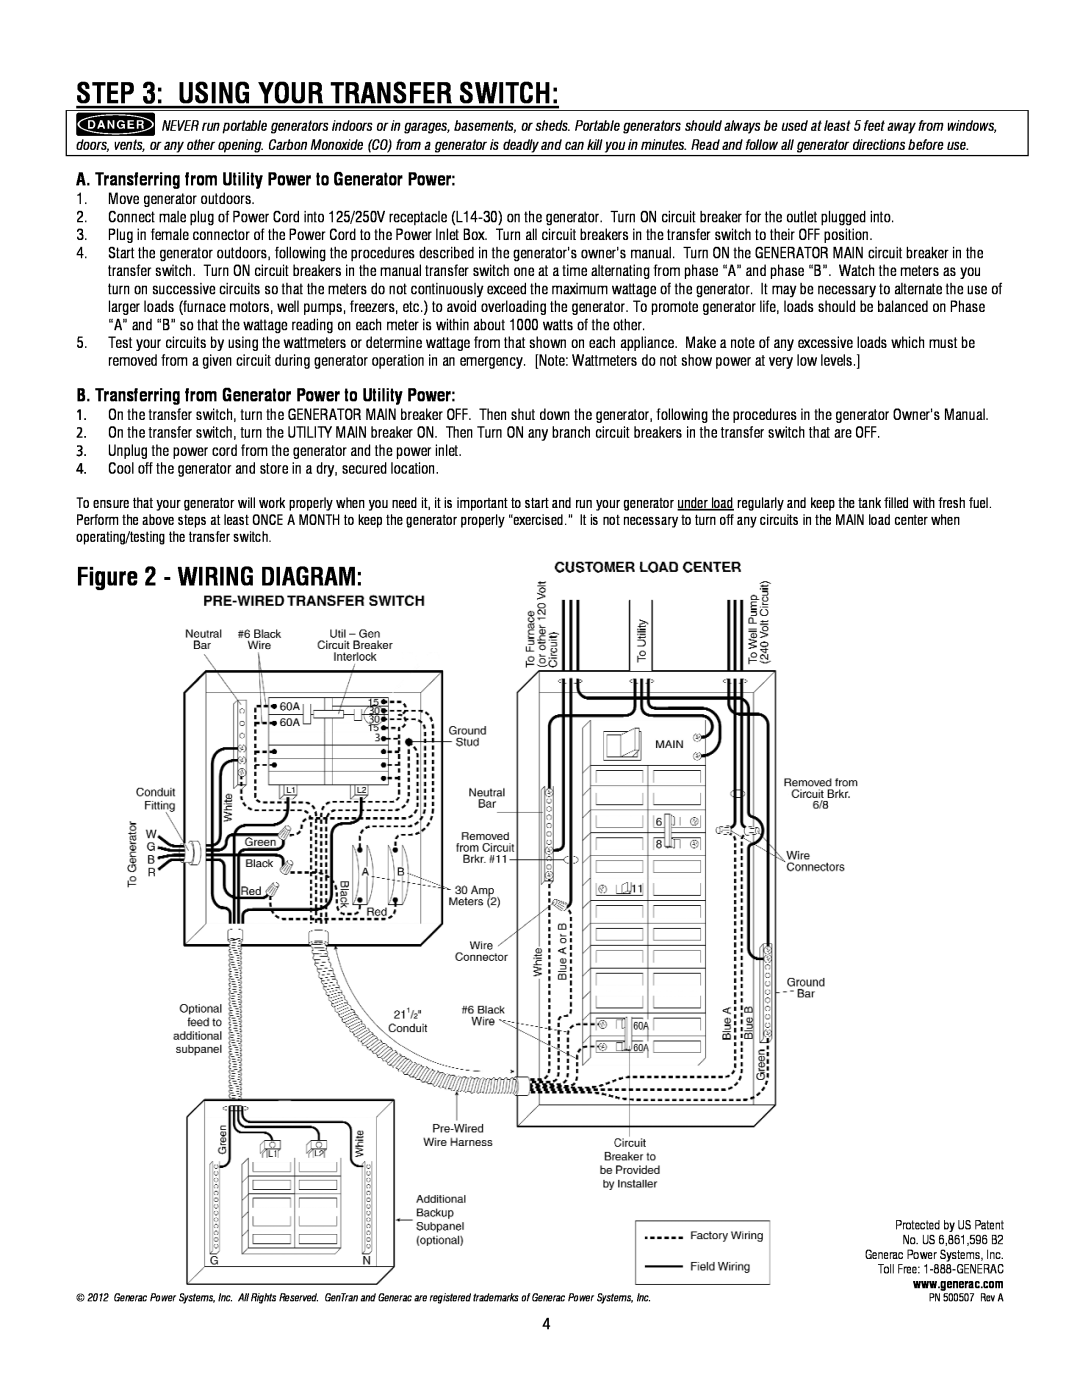 Generac 6294 Using Your Transfer Switch, Wiring Diagram, A. Transferring from Utility Power to Generator Power 